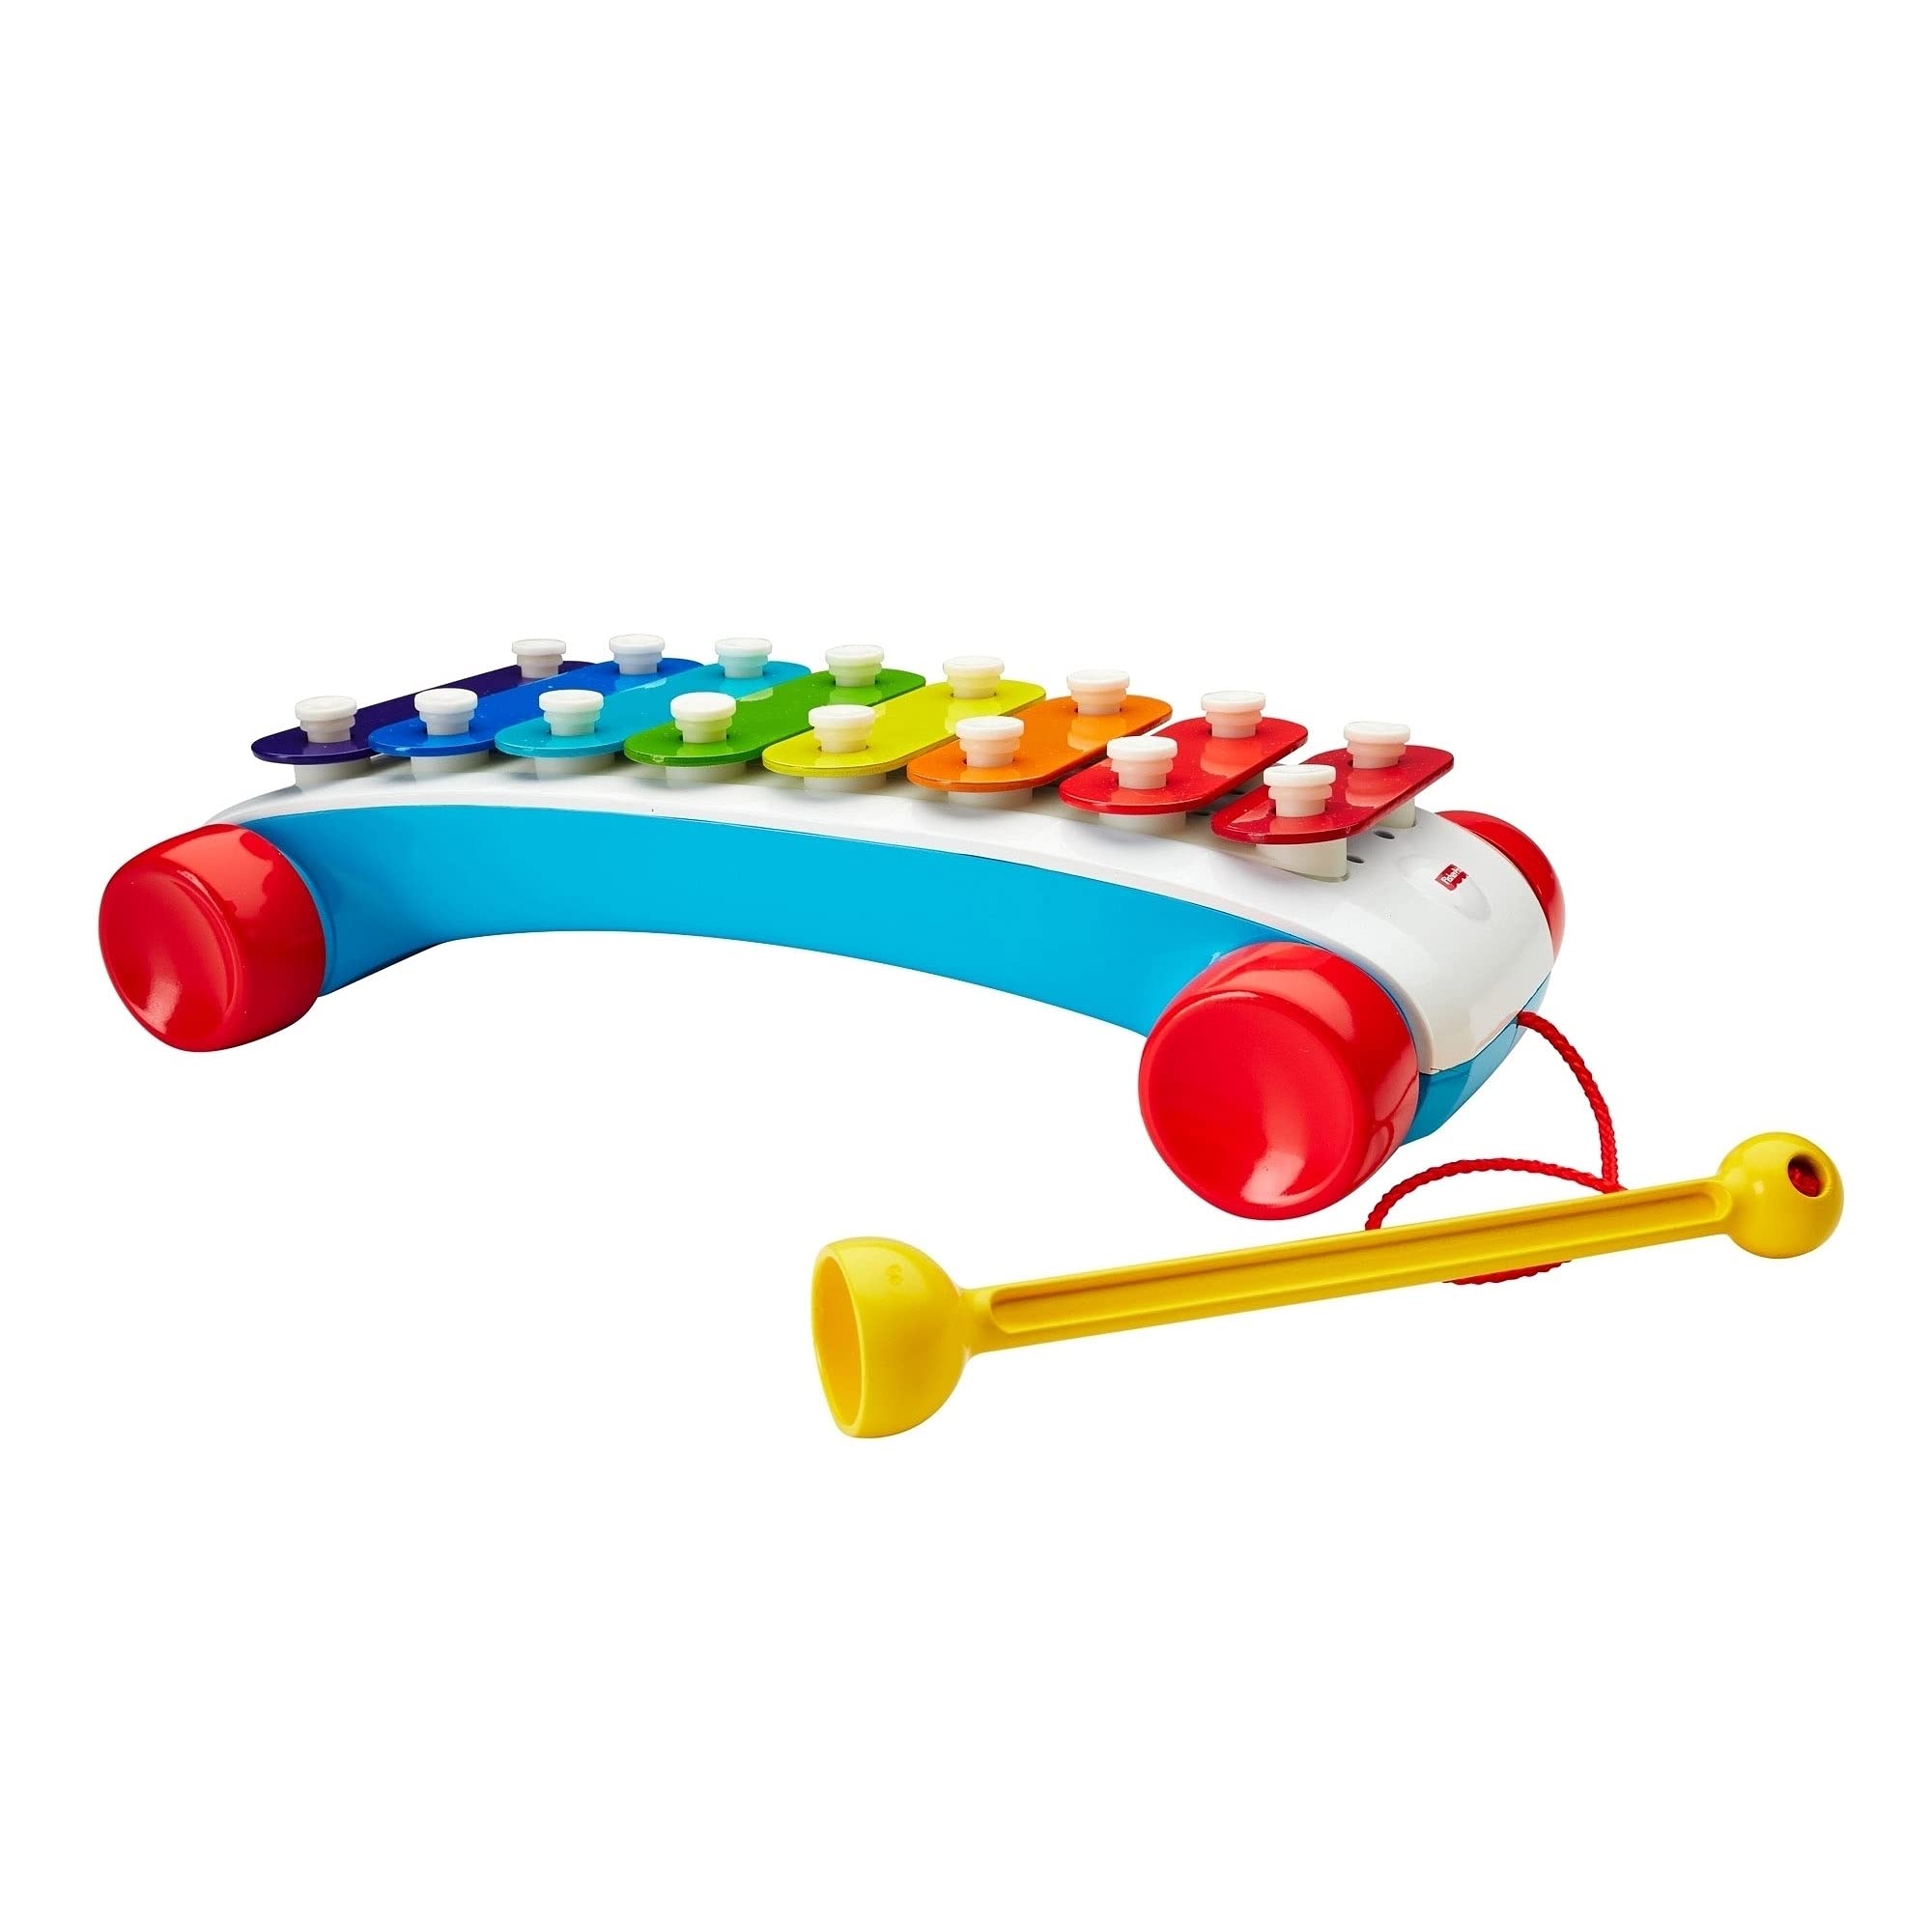 FISHER PRICE CLASSIC XYLOPHONE